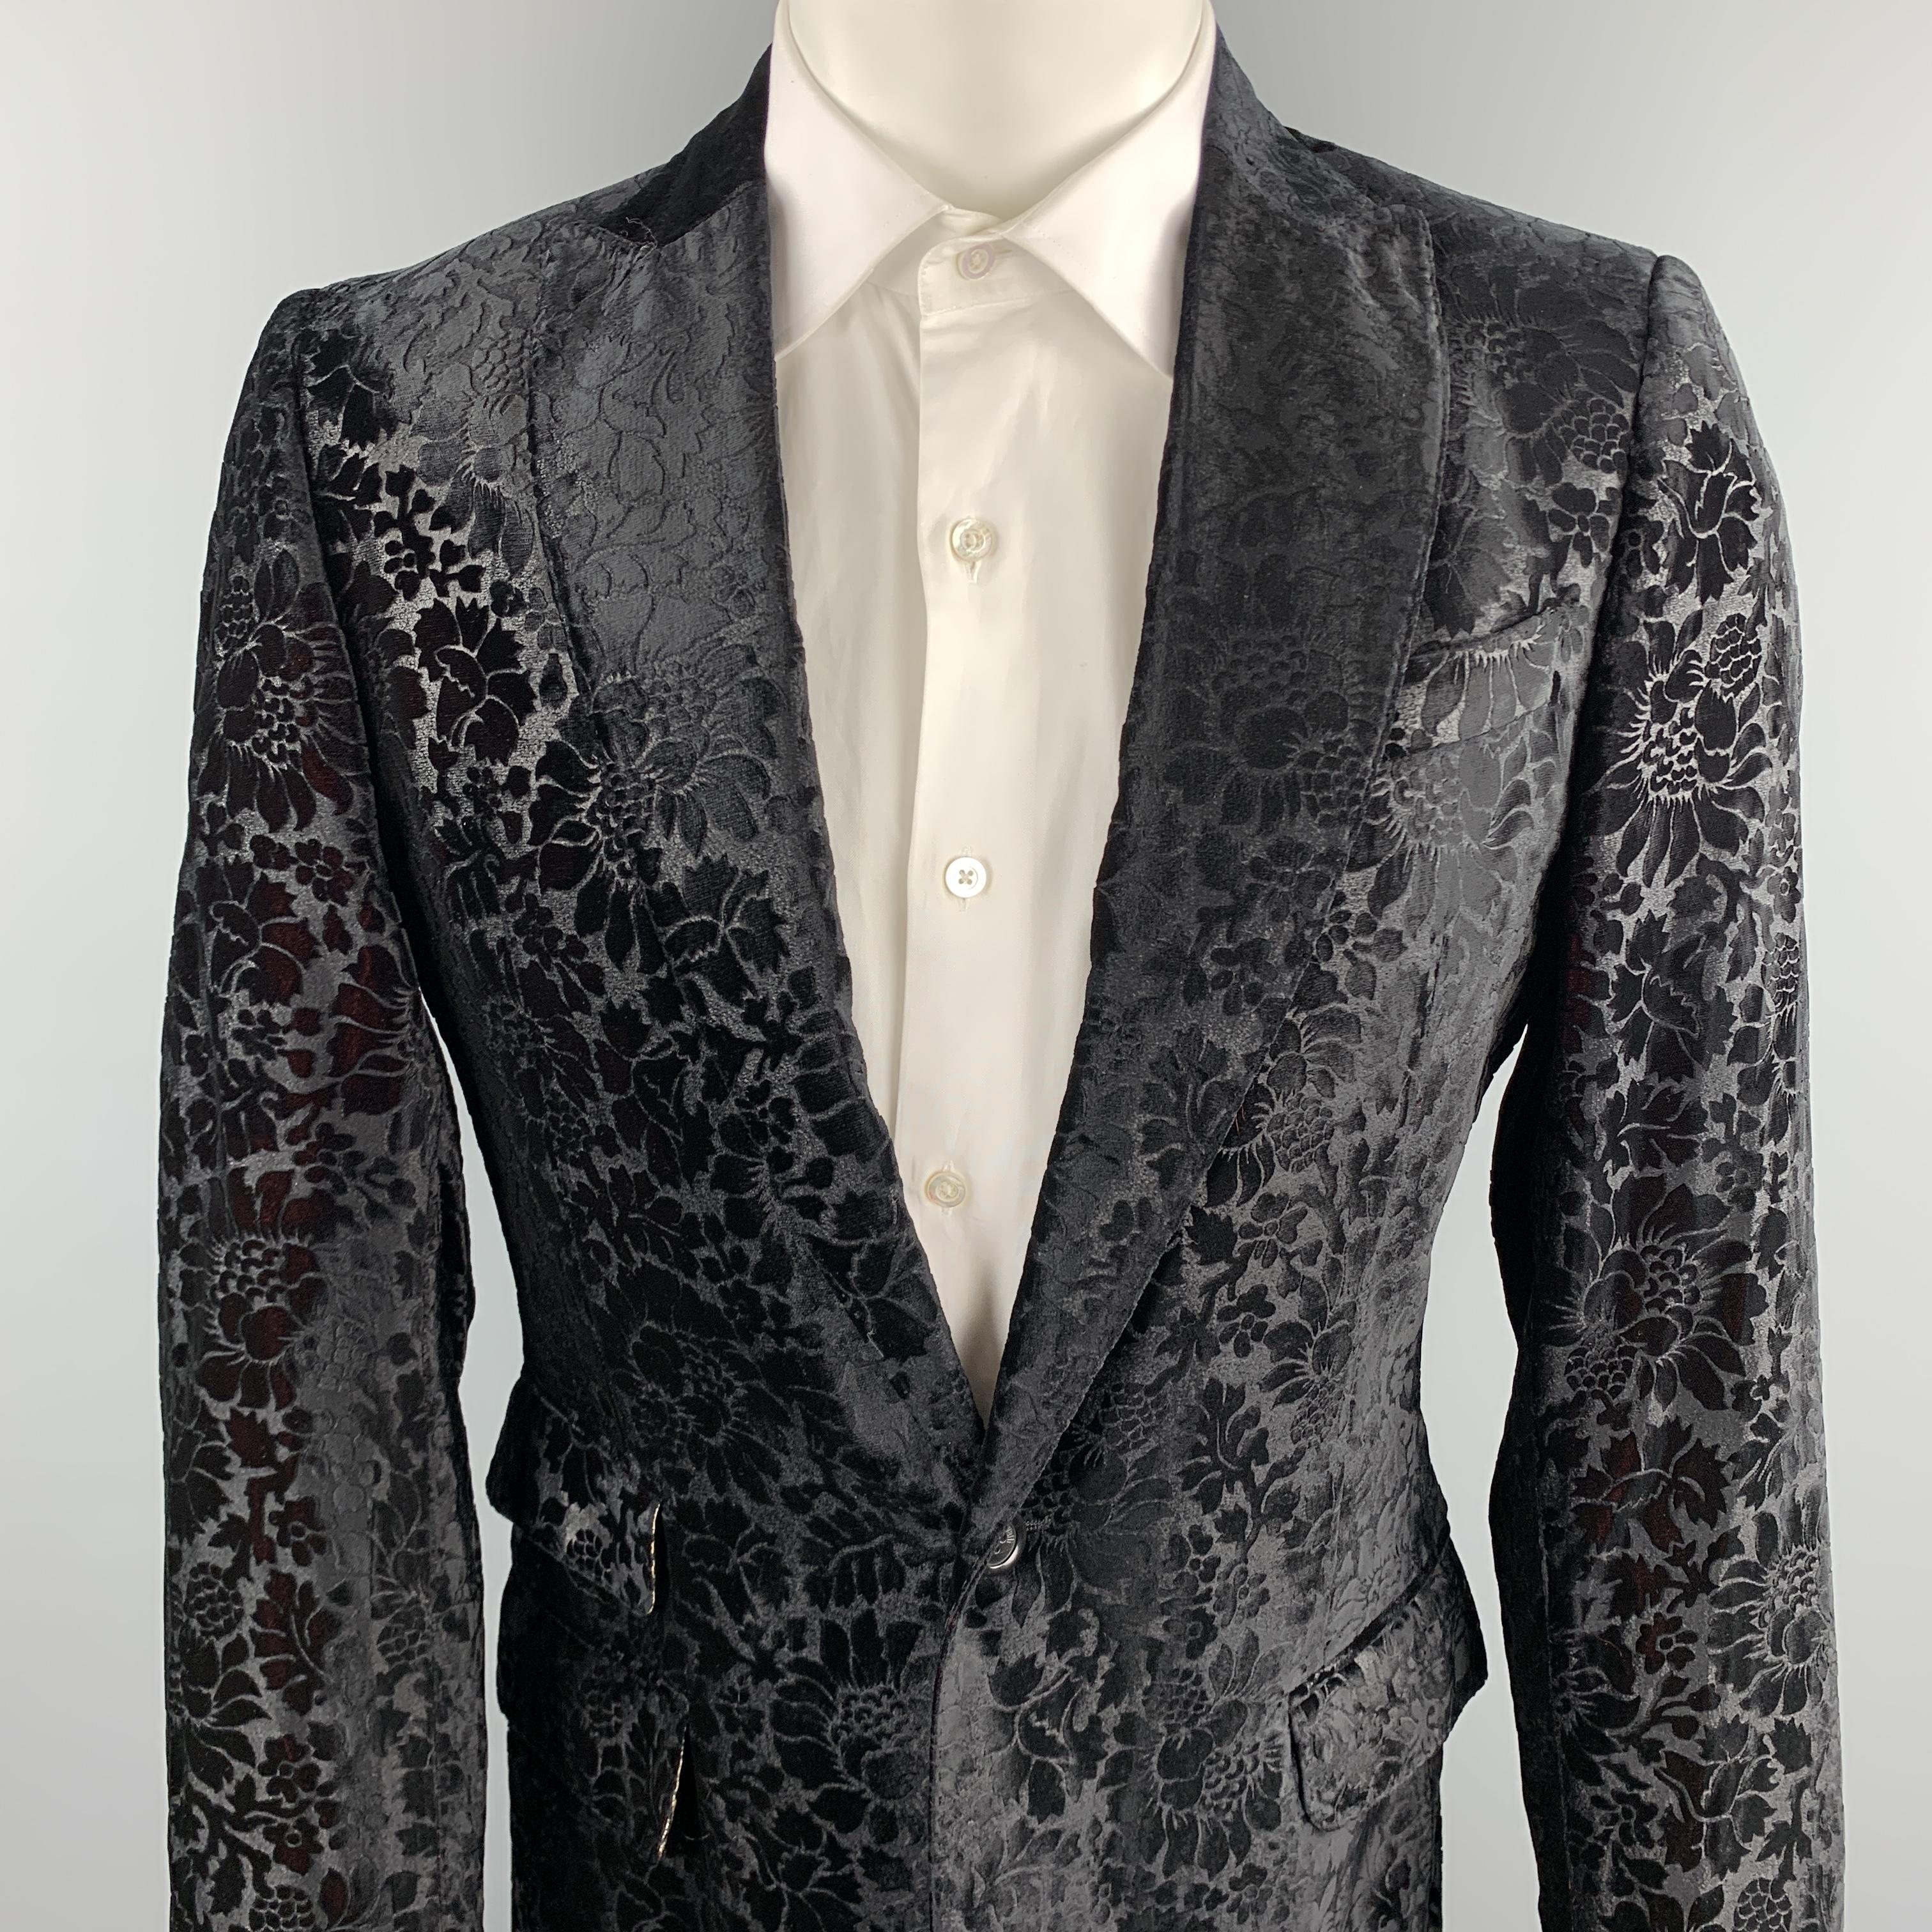 JUST CAVALLI sport coat comes in a black & burgundy floral virgin wool featuring a peak lapel style, flap pockets, snake print liner, and a single button closure. Made in Italy.

Excellent Pre-Owned Condition.
Marked: IT 50

Measurements:

Shoulder: